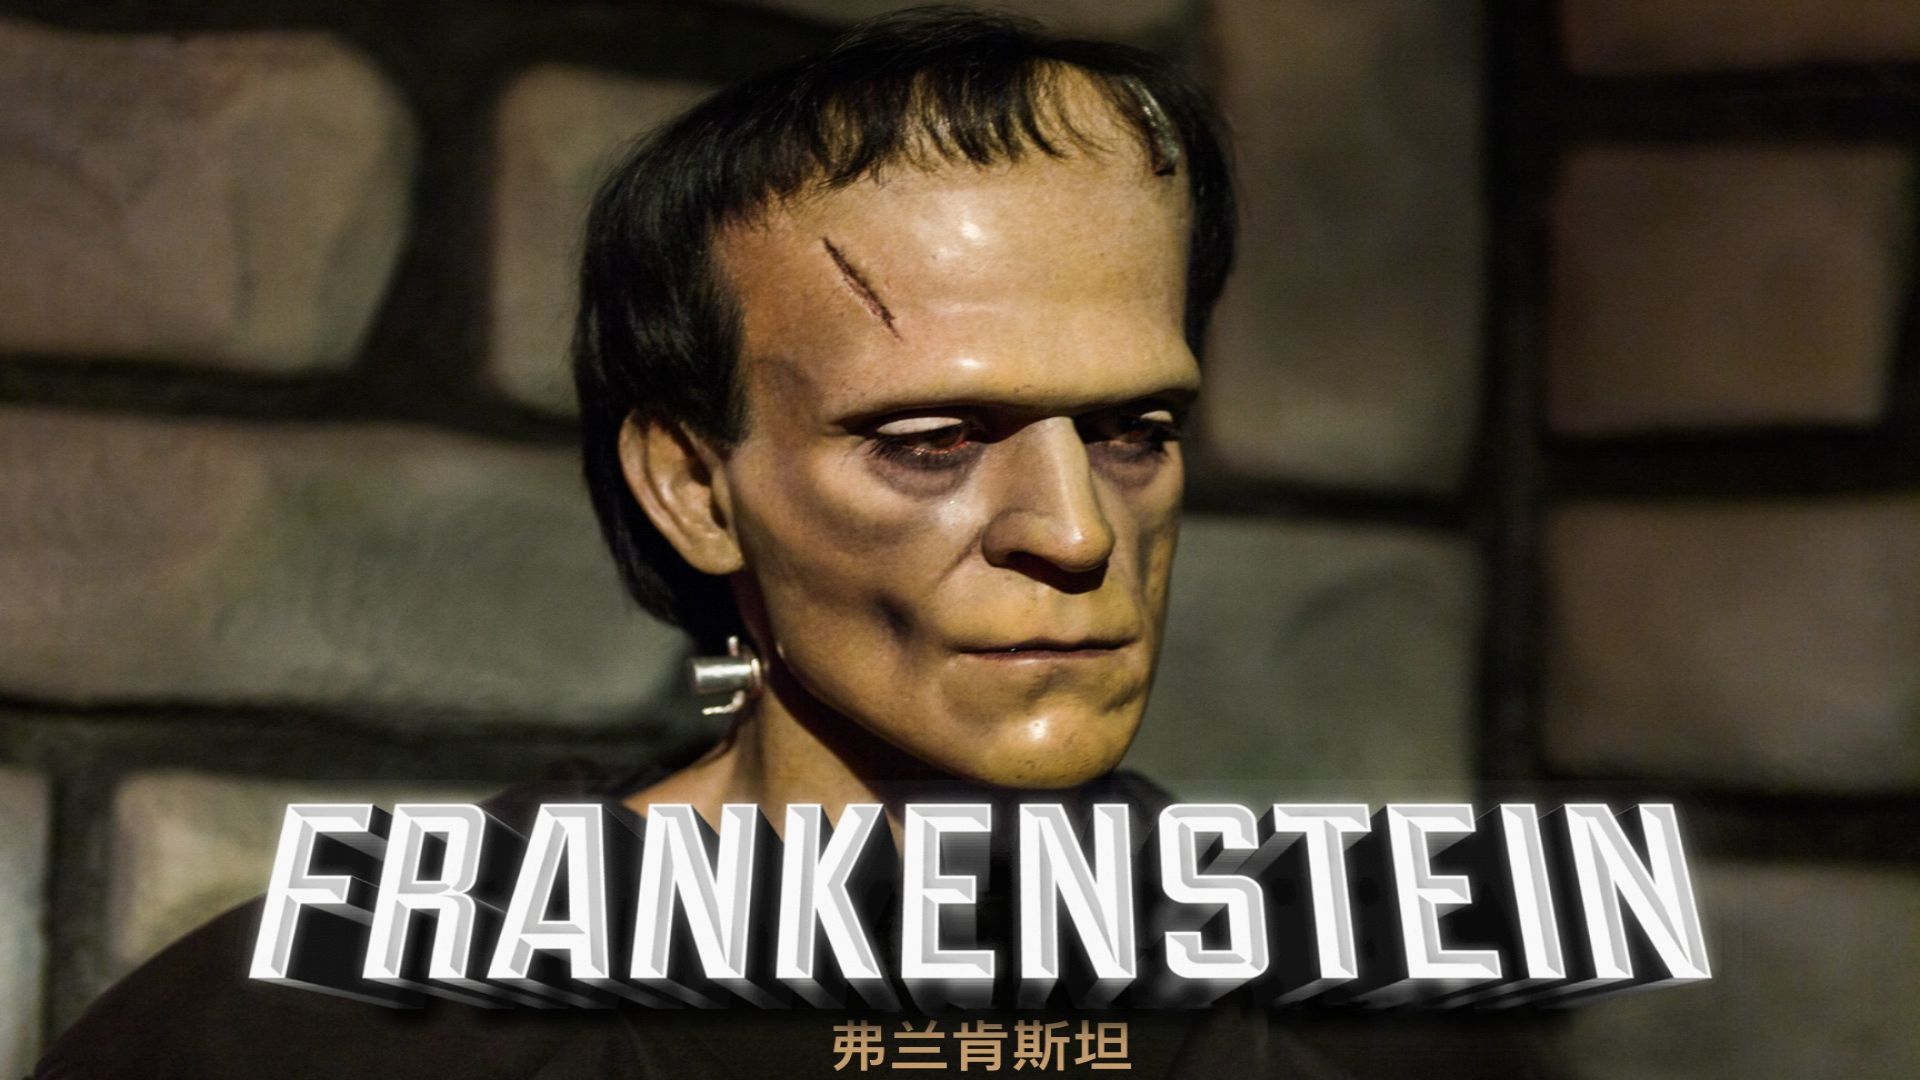 What is the Reason that Frankenstein Creates the Monster?